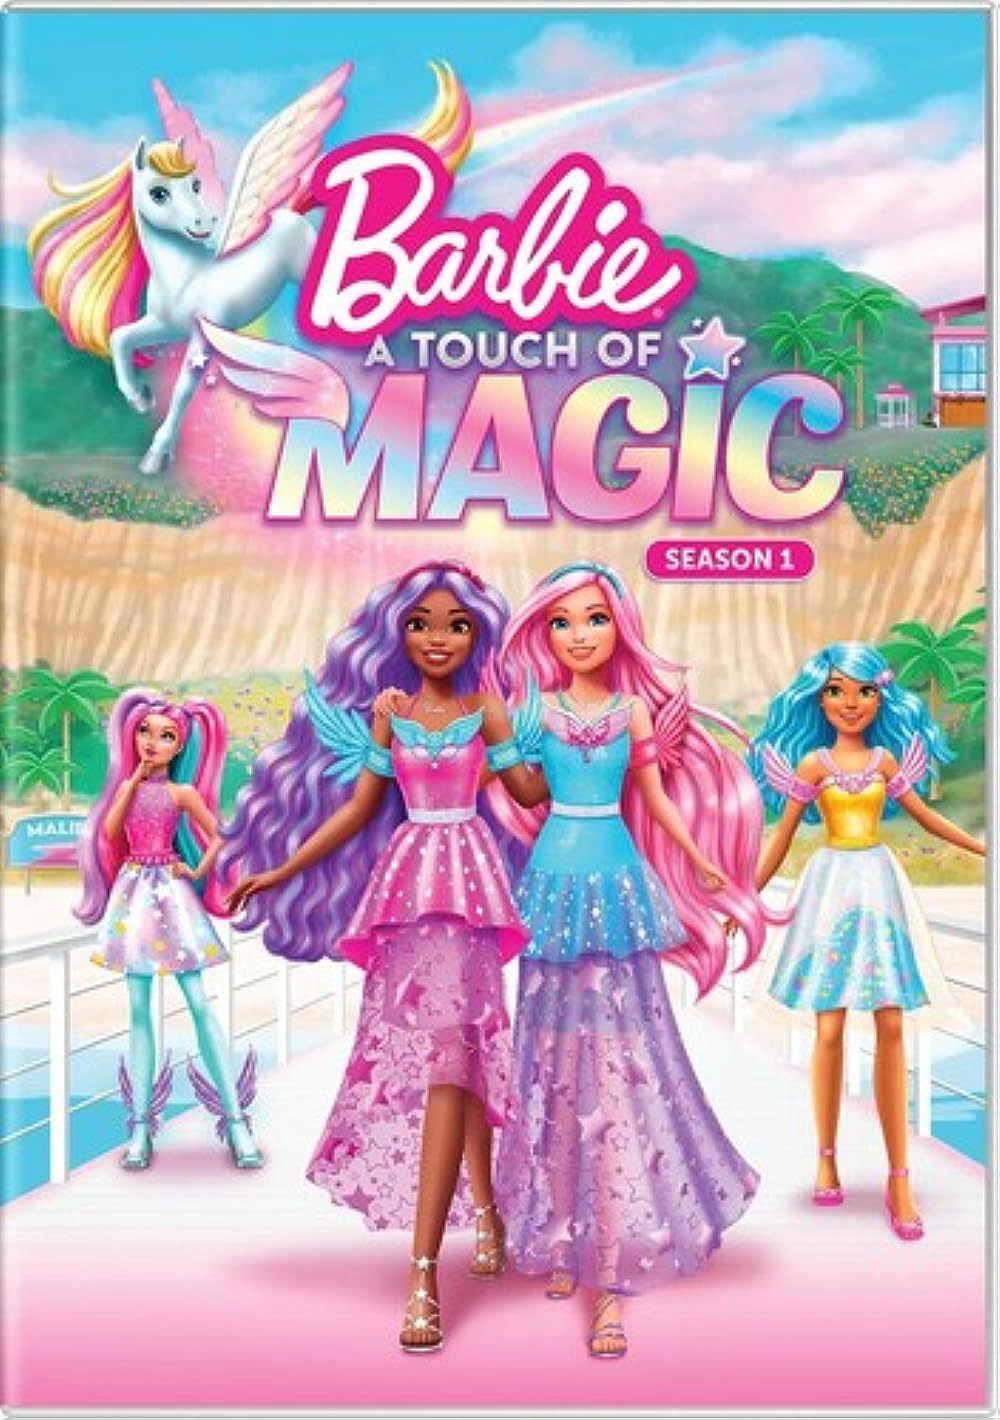 Poster Phim Barbie: A Touch of Magic (Barbie: A Touch of Magic)